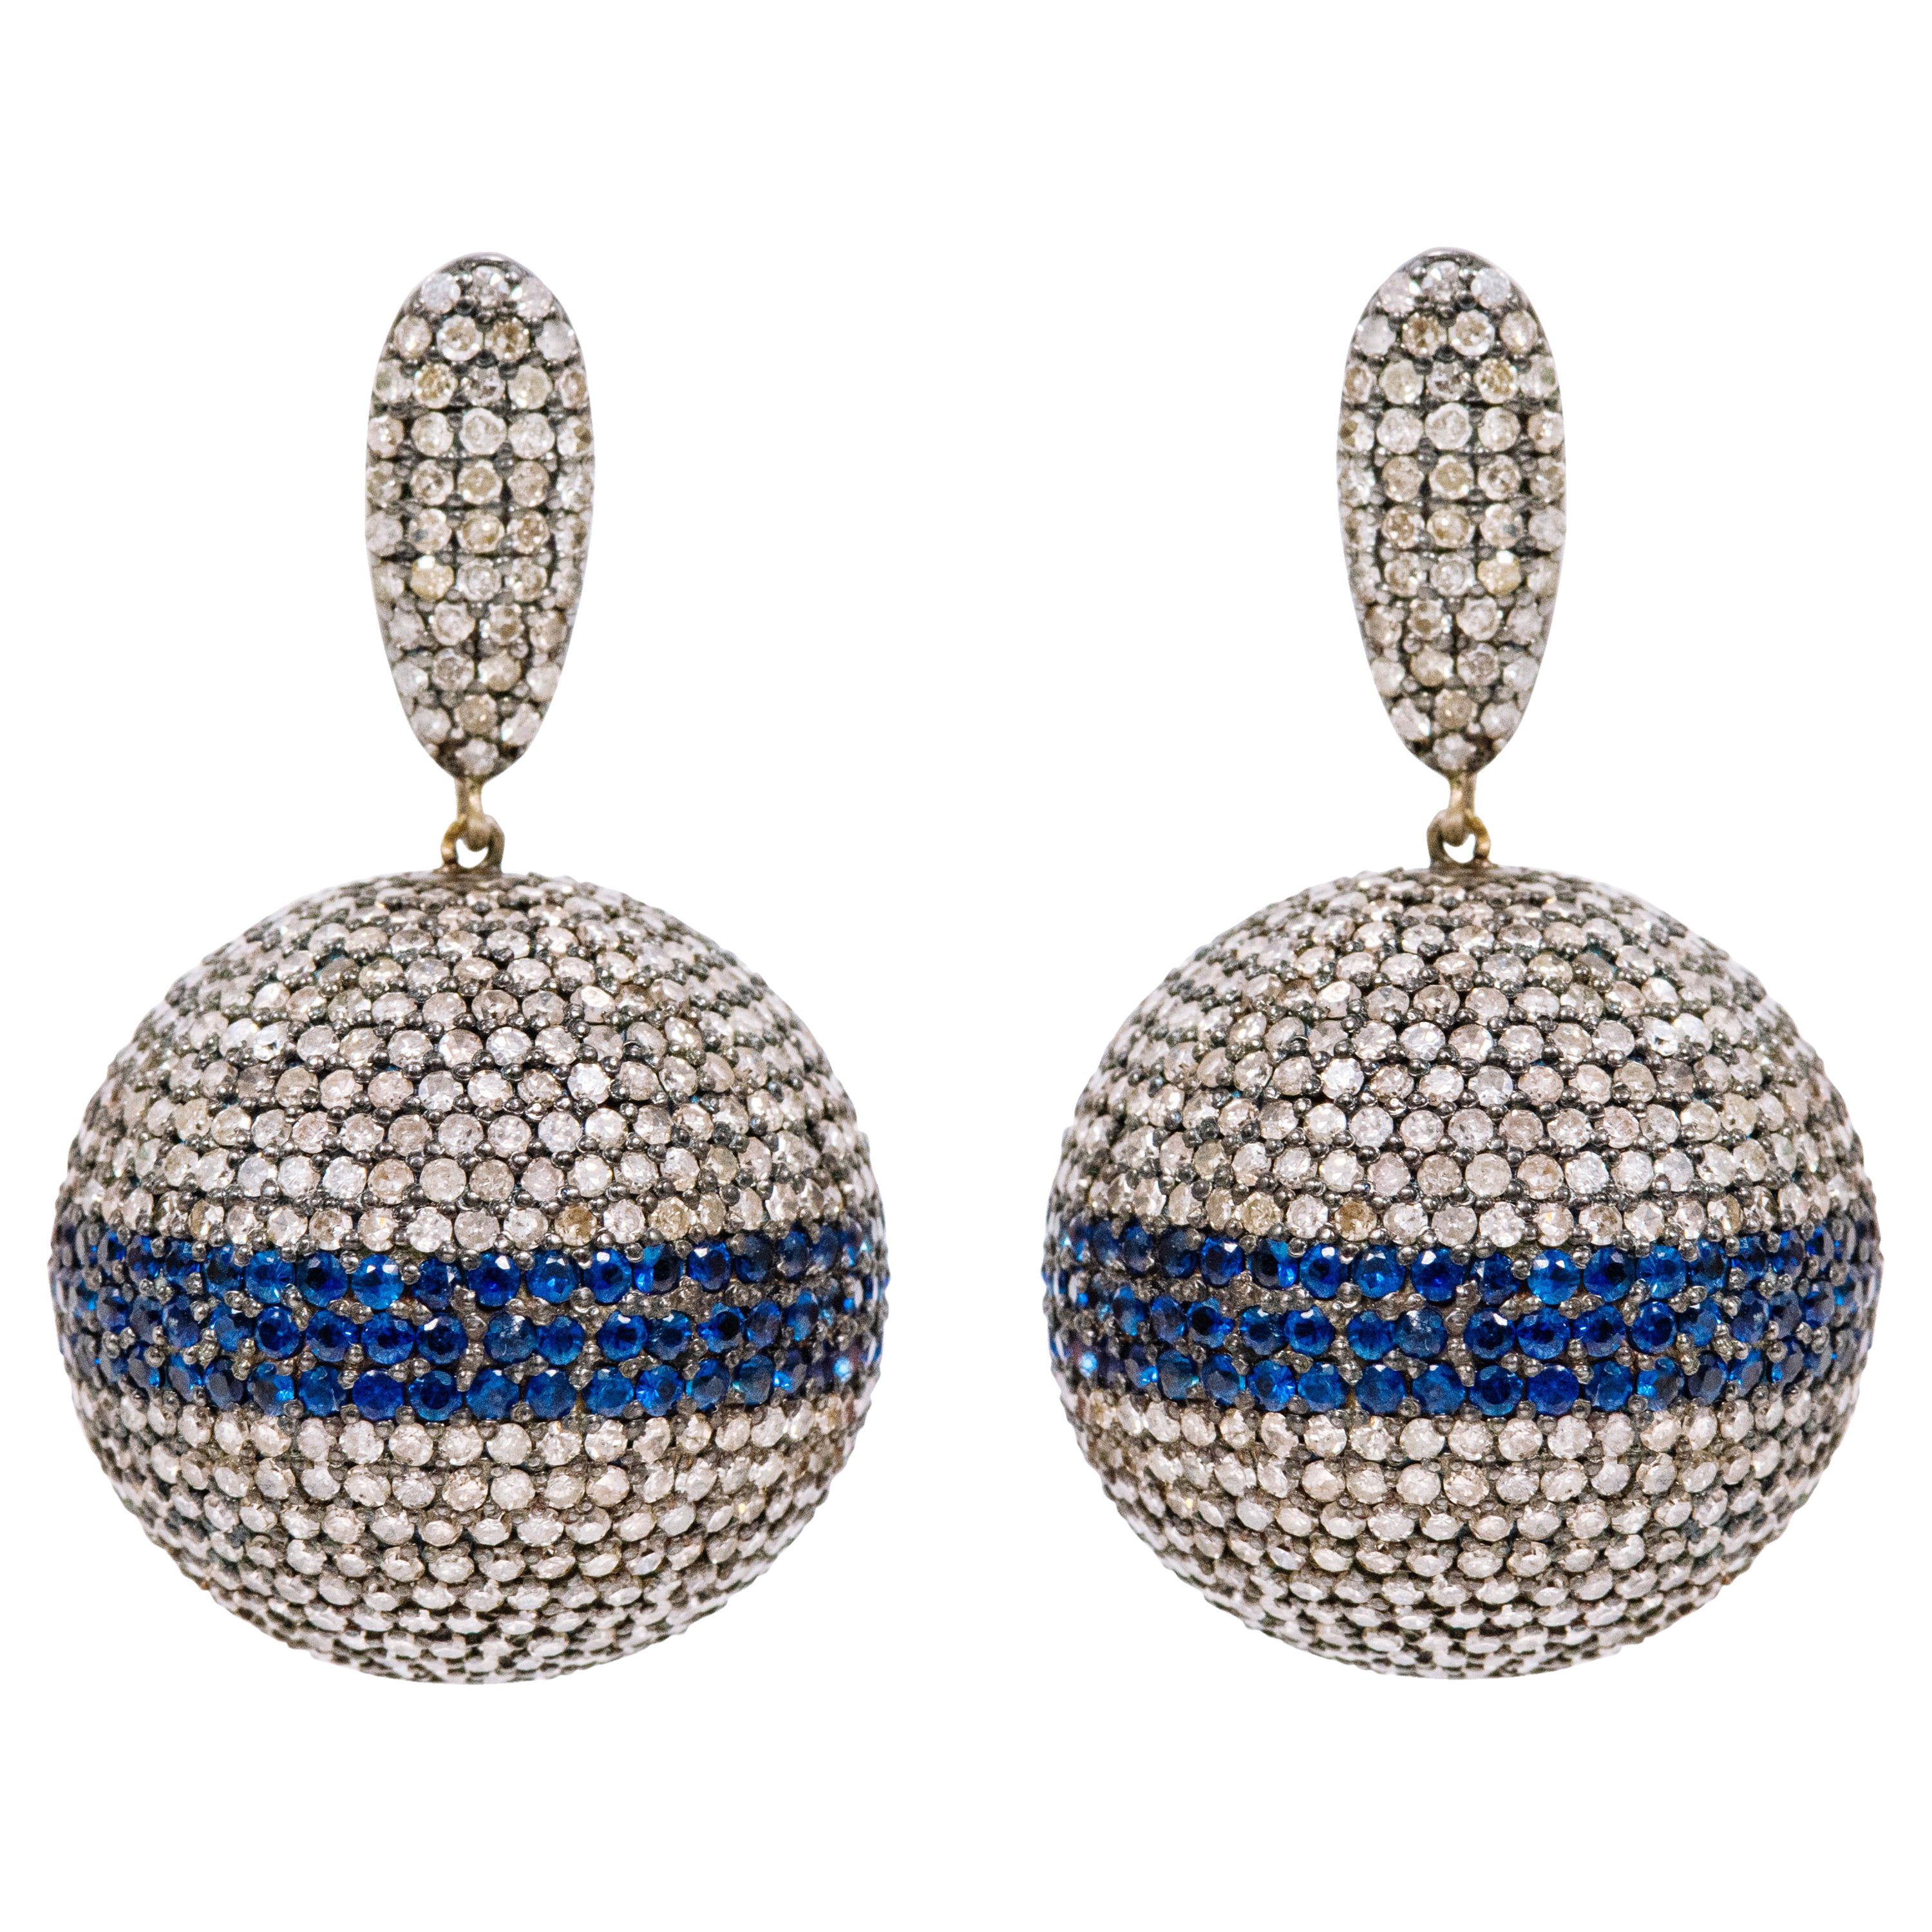 Victorian Style Diamond and Sapphire Cocktail Ball Drop Earrings